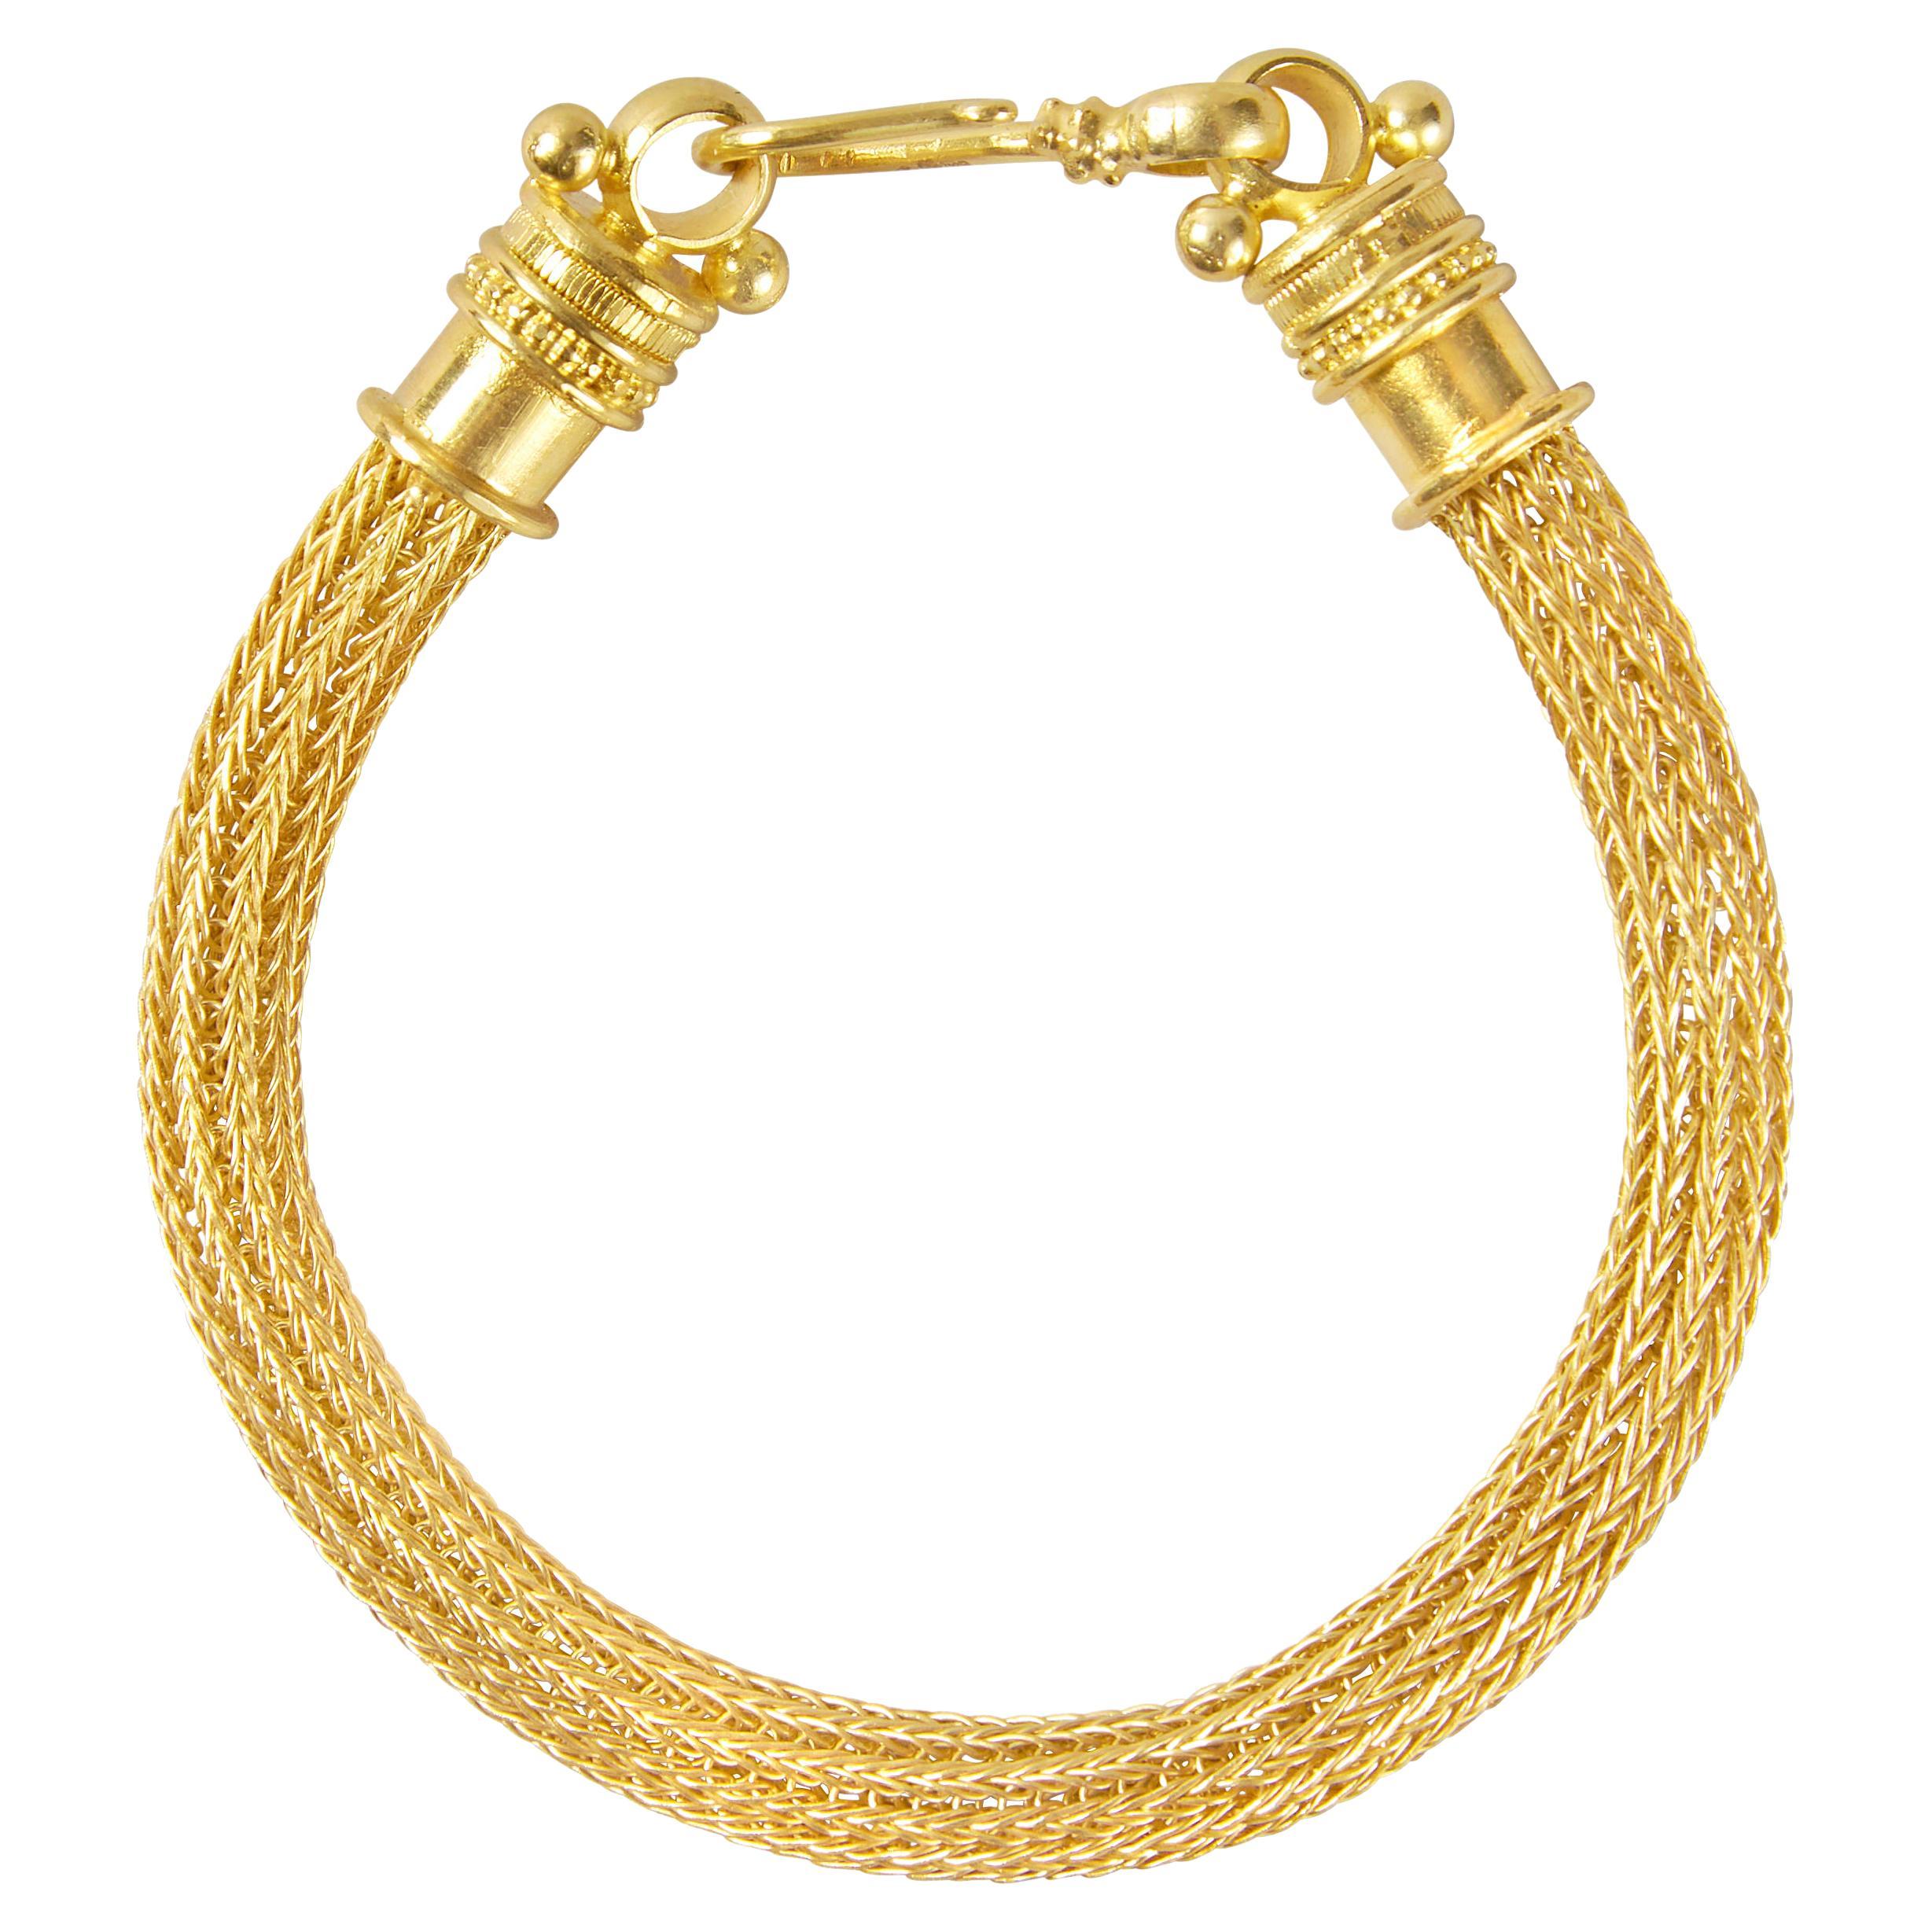 18kt Gold Rope Chain Bracelet with Hand Crafted Decorative Looped Clasp For Sale